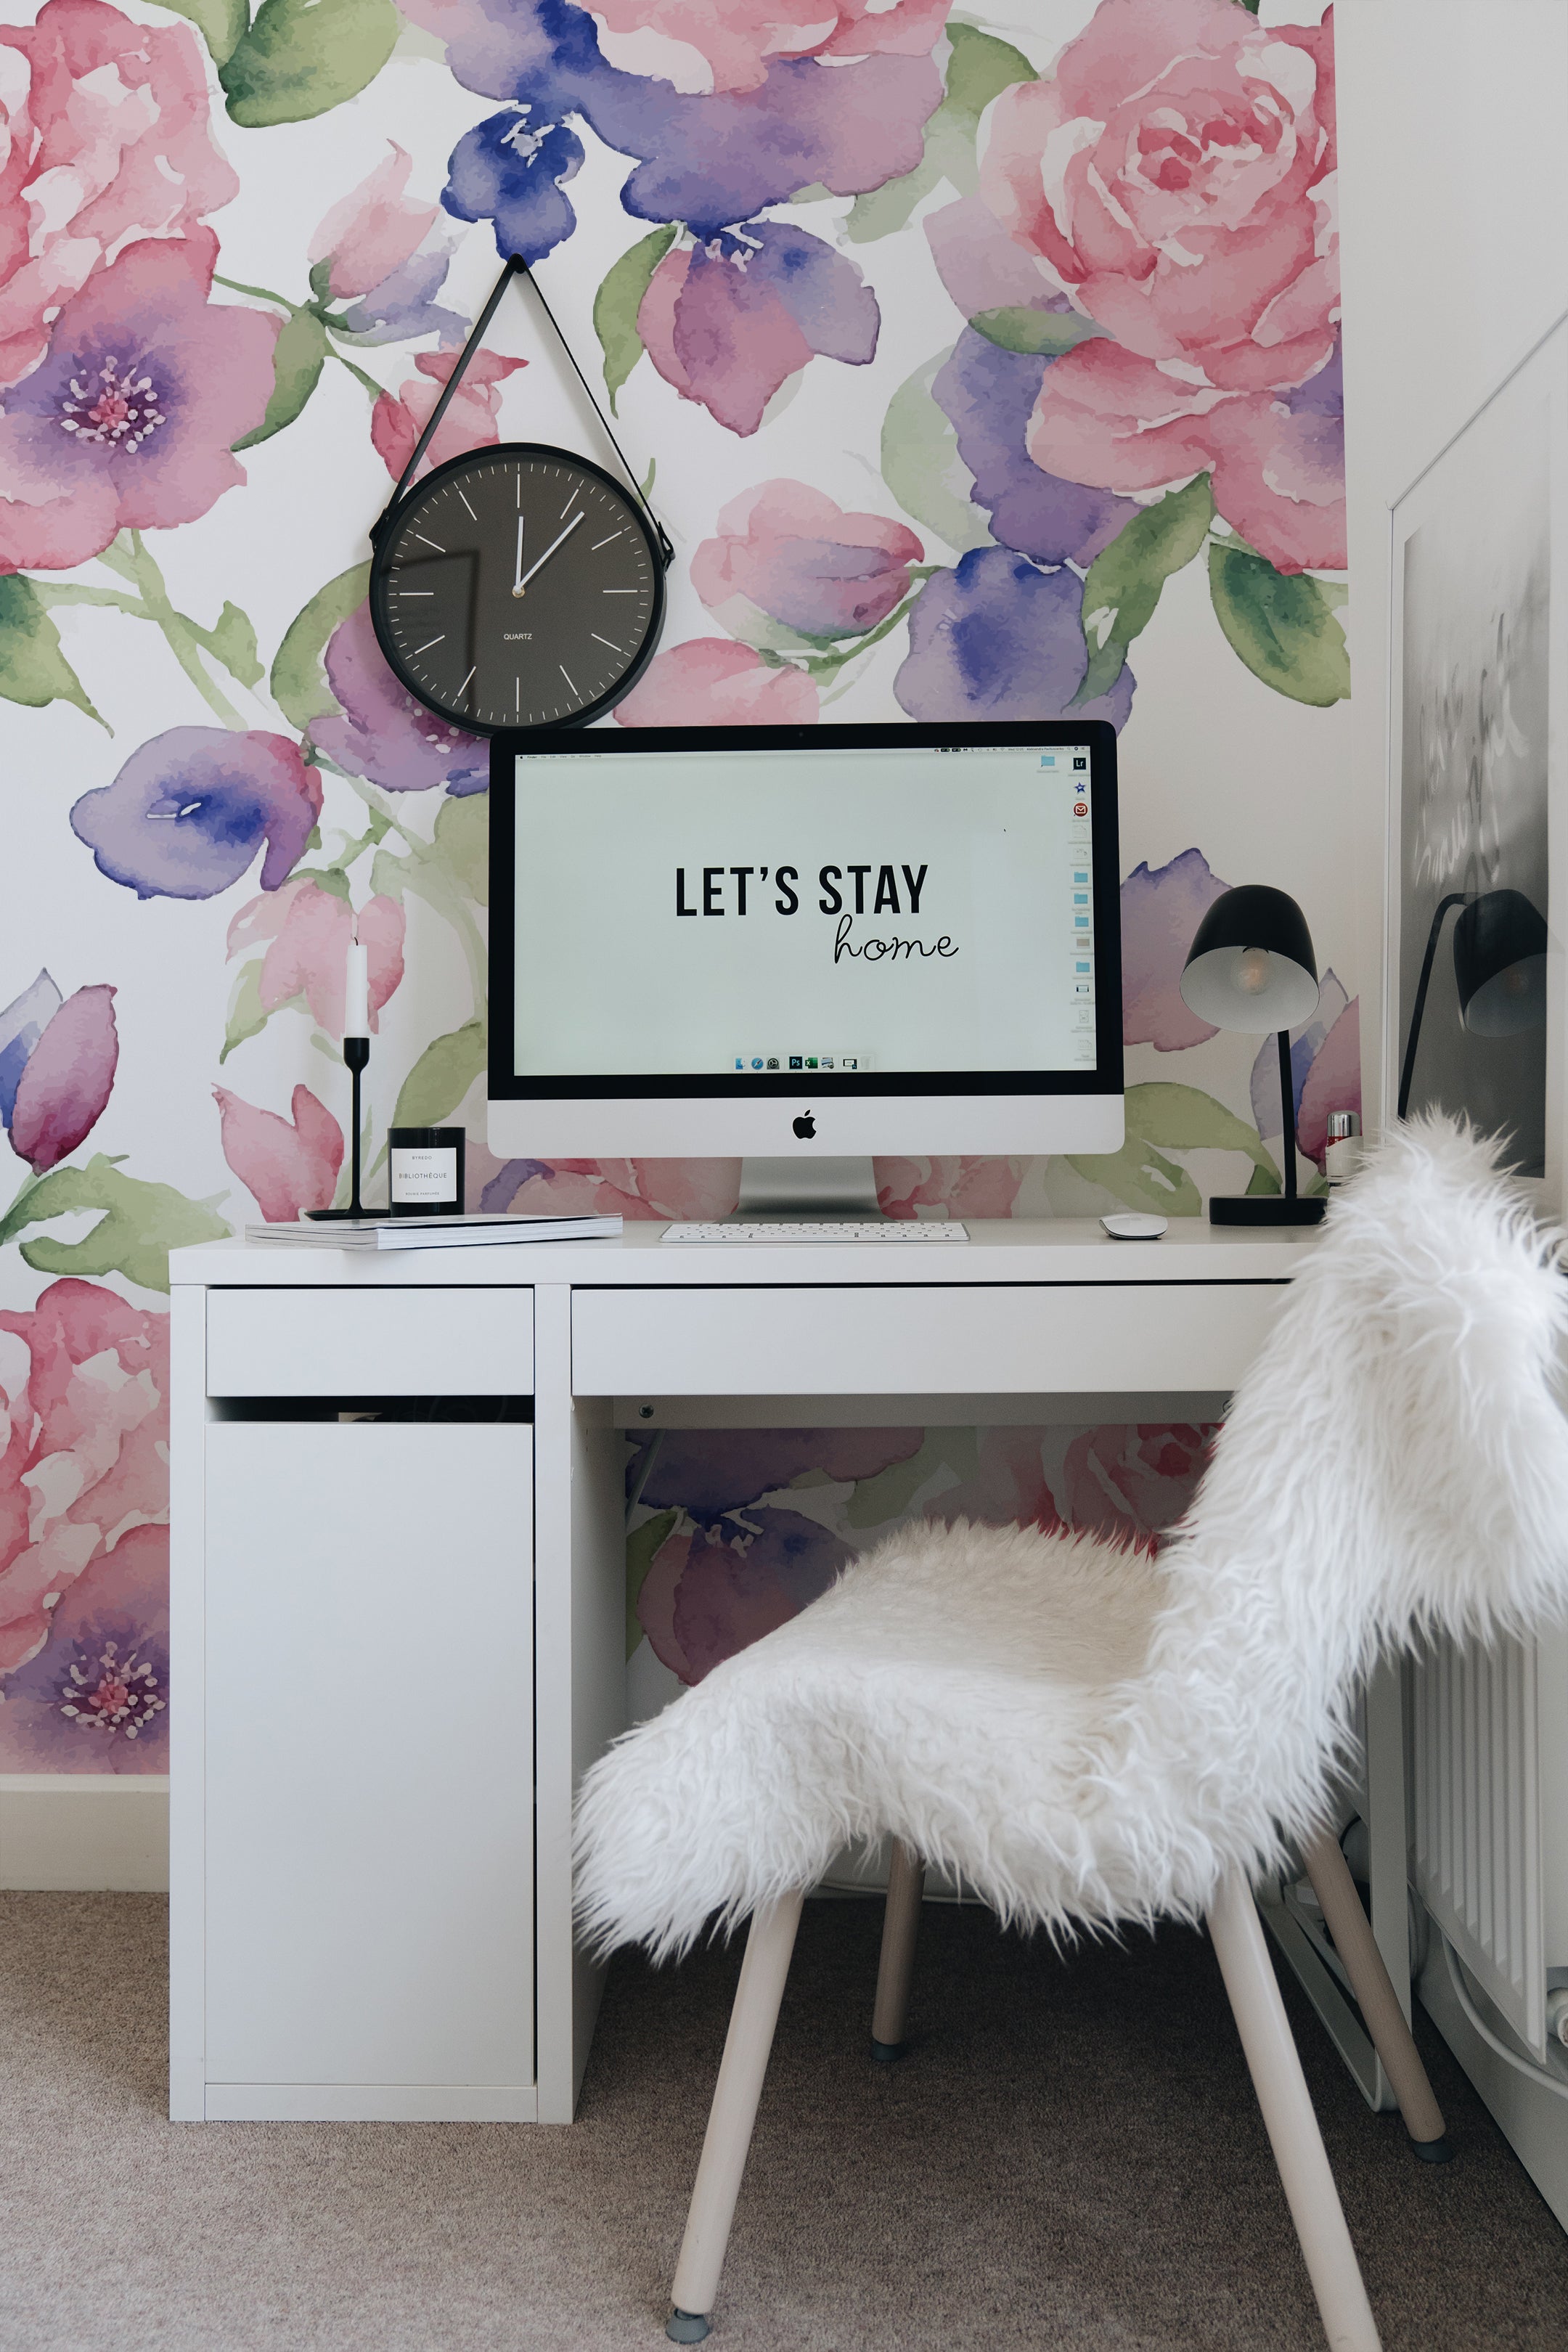 A stylish home office setup featuring Mystic Garden Wallpaper, which displays a lush array of watercolor roses and other blooms in shades of pink, purple, and blue. Above the minimalist white desk, a motivational 'Let's stay home' poster hangs on the floral backdrop, creating a serene and inspiring workspace.